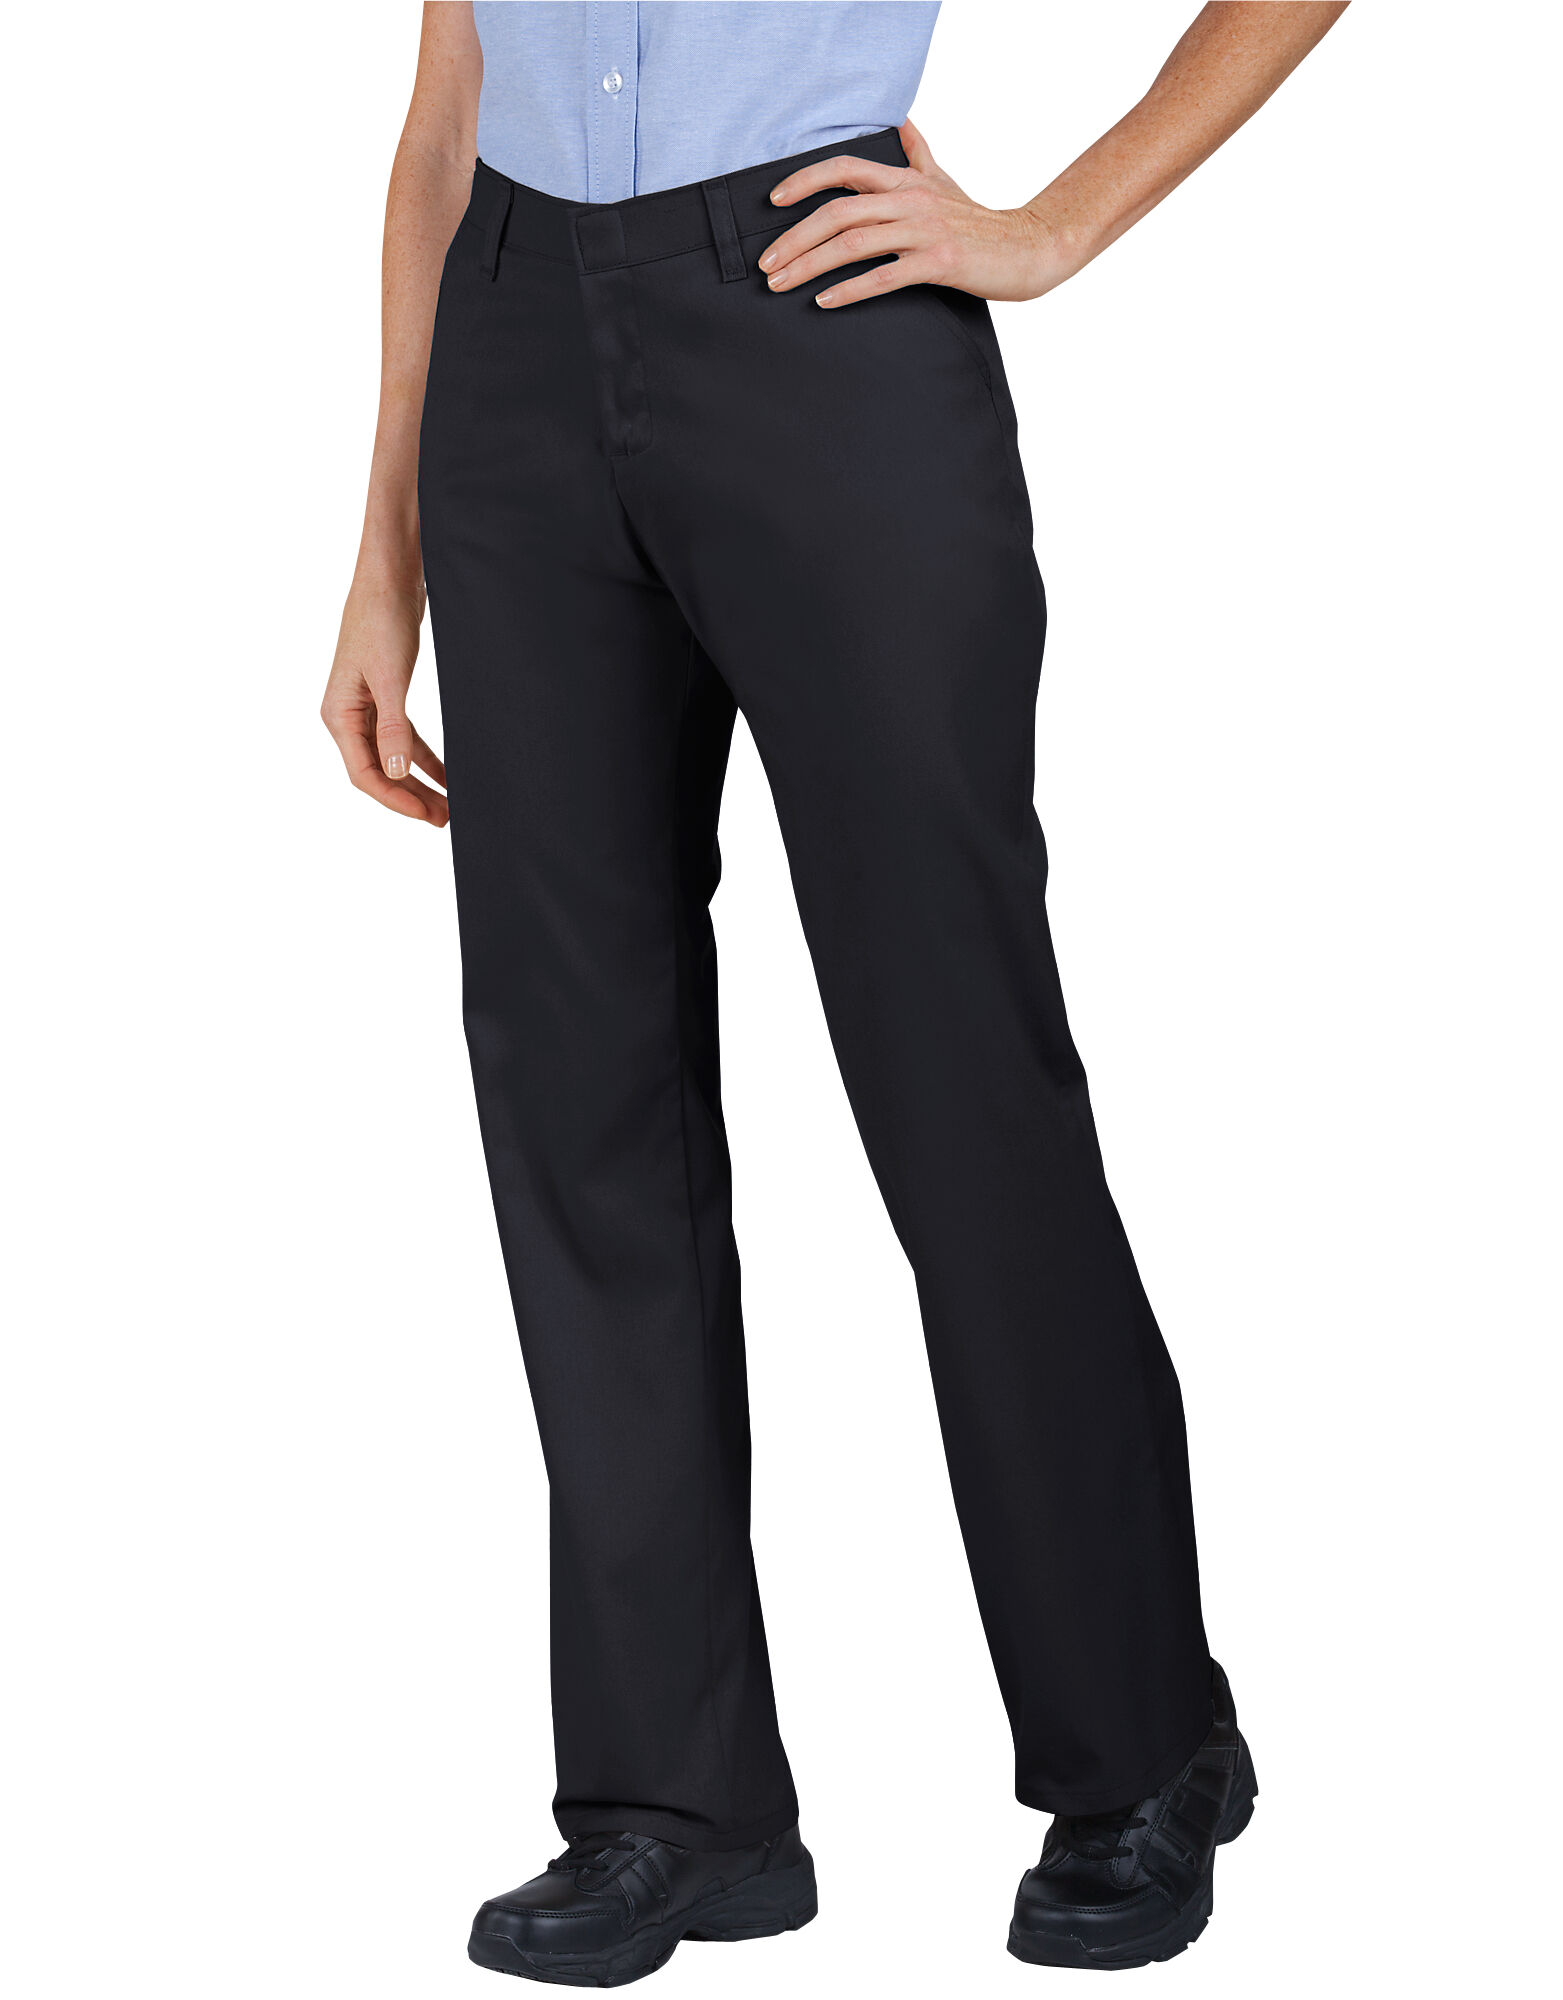 Women's Industrial Flat Front Twill Pants | Womens Pants | Dickies